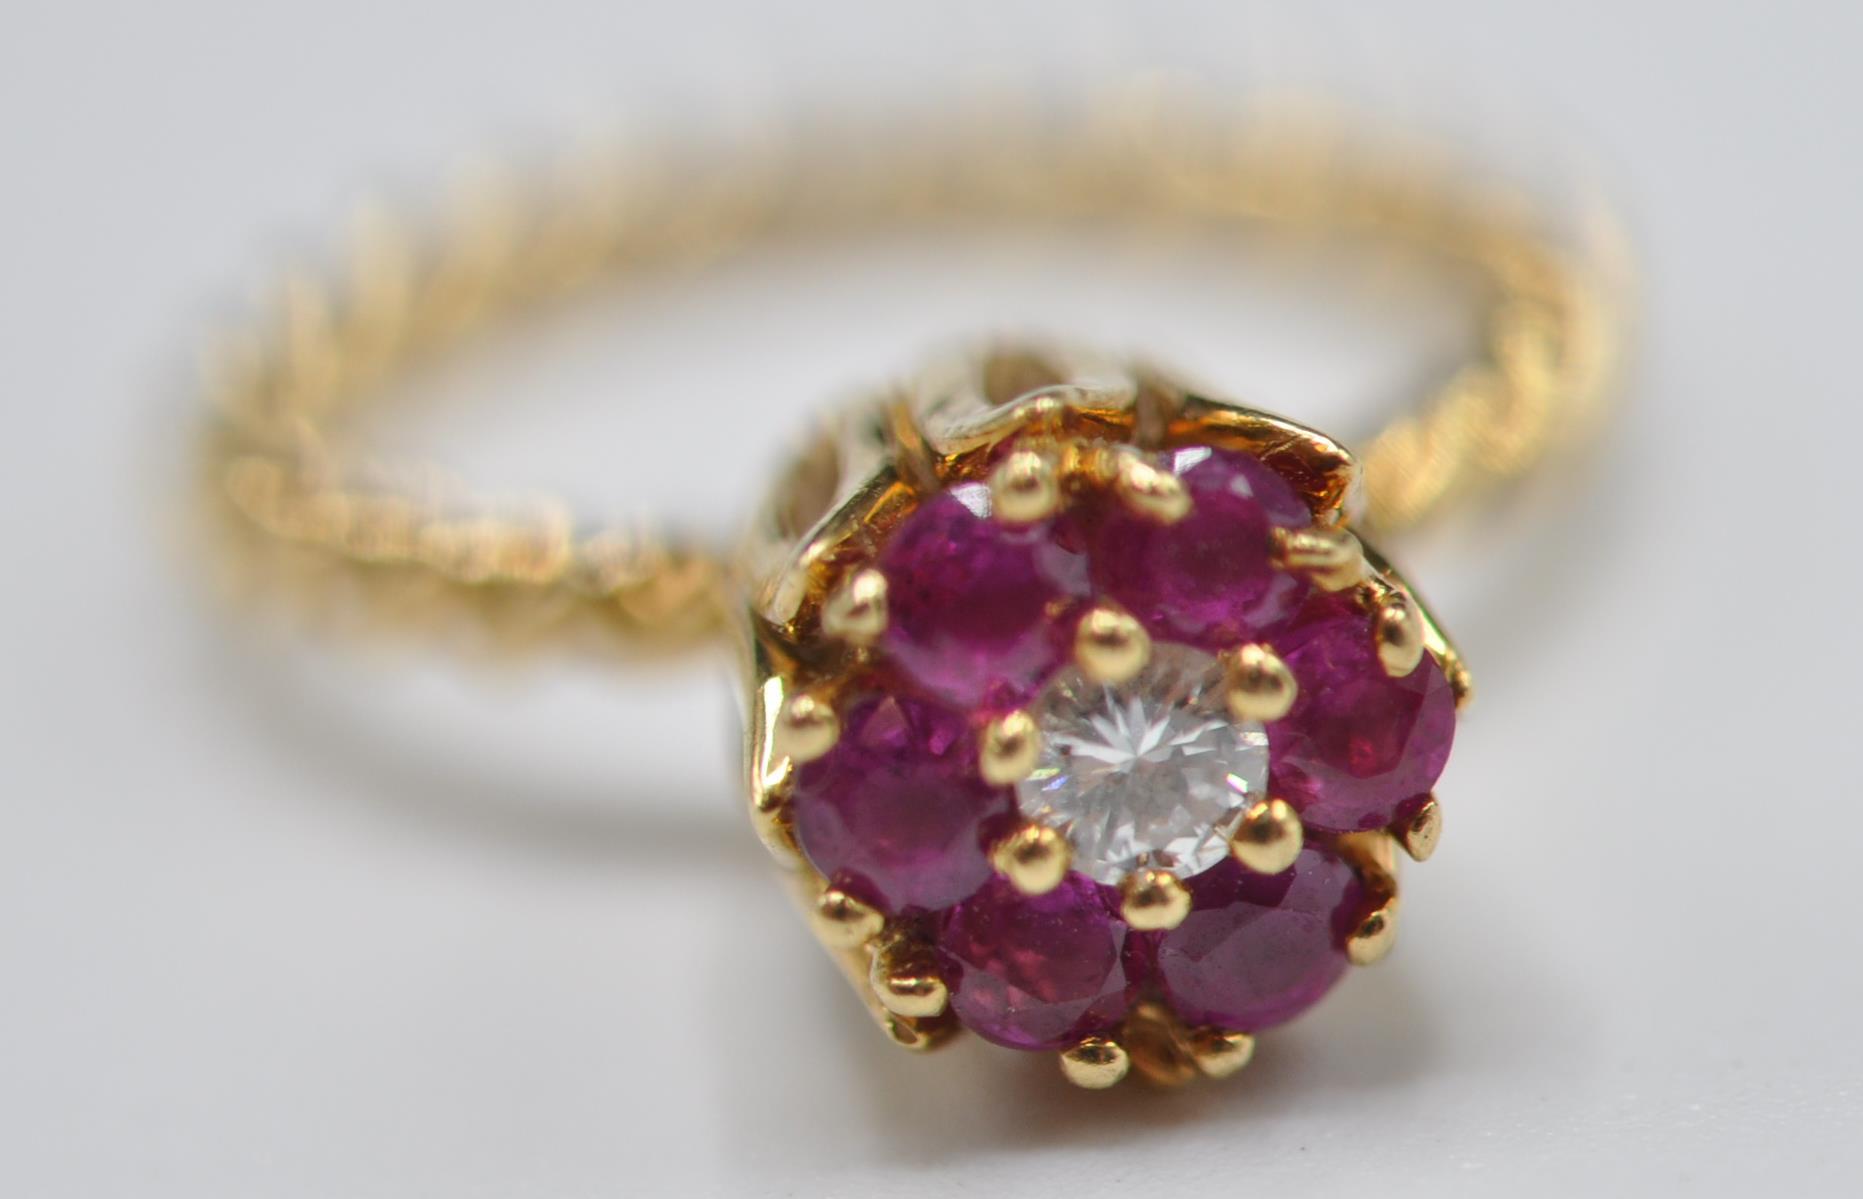 STAMPED 14CT GOLD RING WITH DIAMONDS AND RUBIES - Image 6 of 6